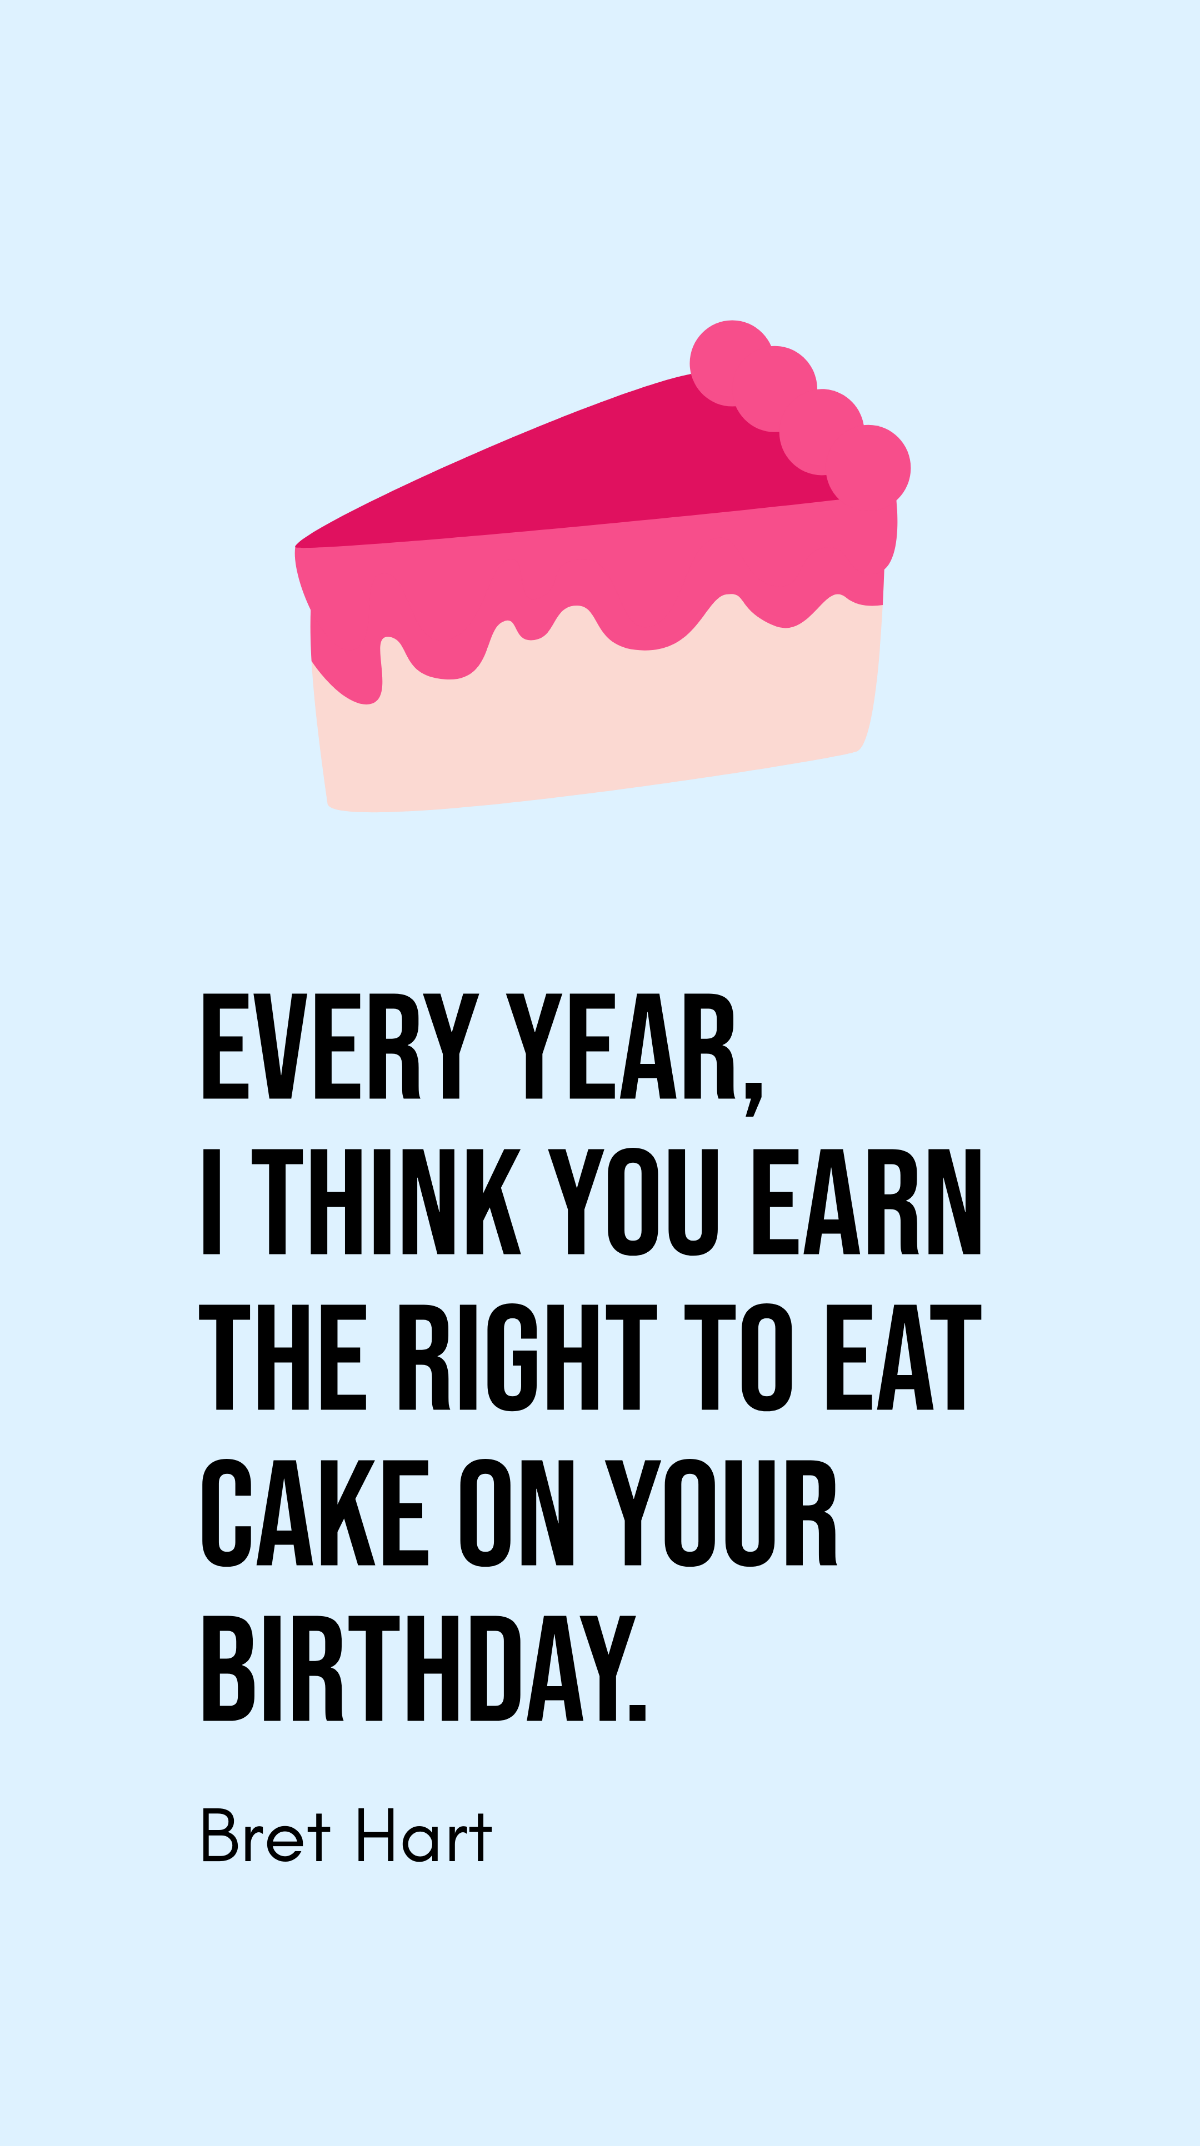 Bret Hart - Every year, I think you earn the right to eat cake on your birthday.